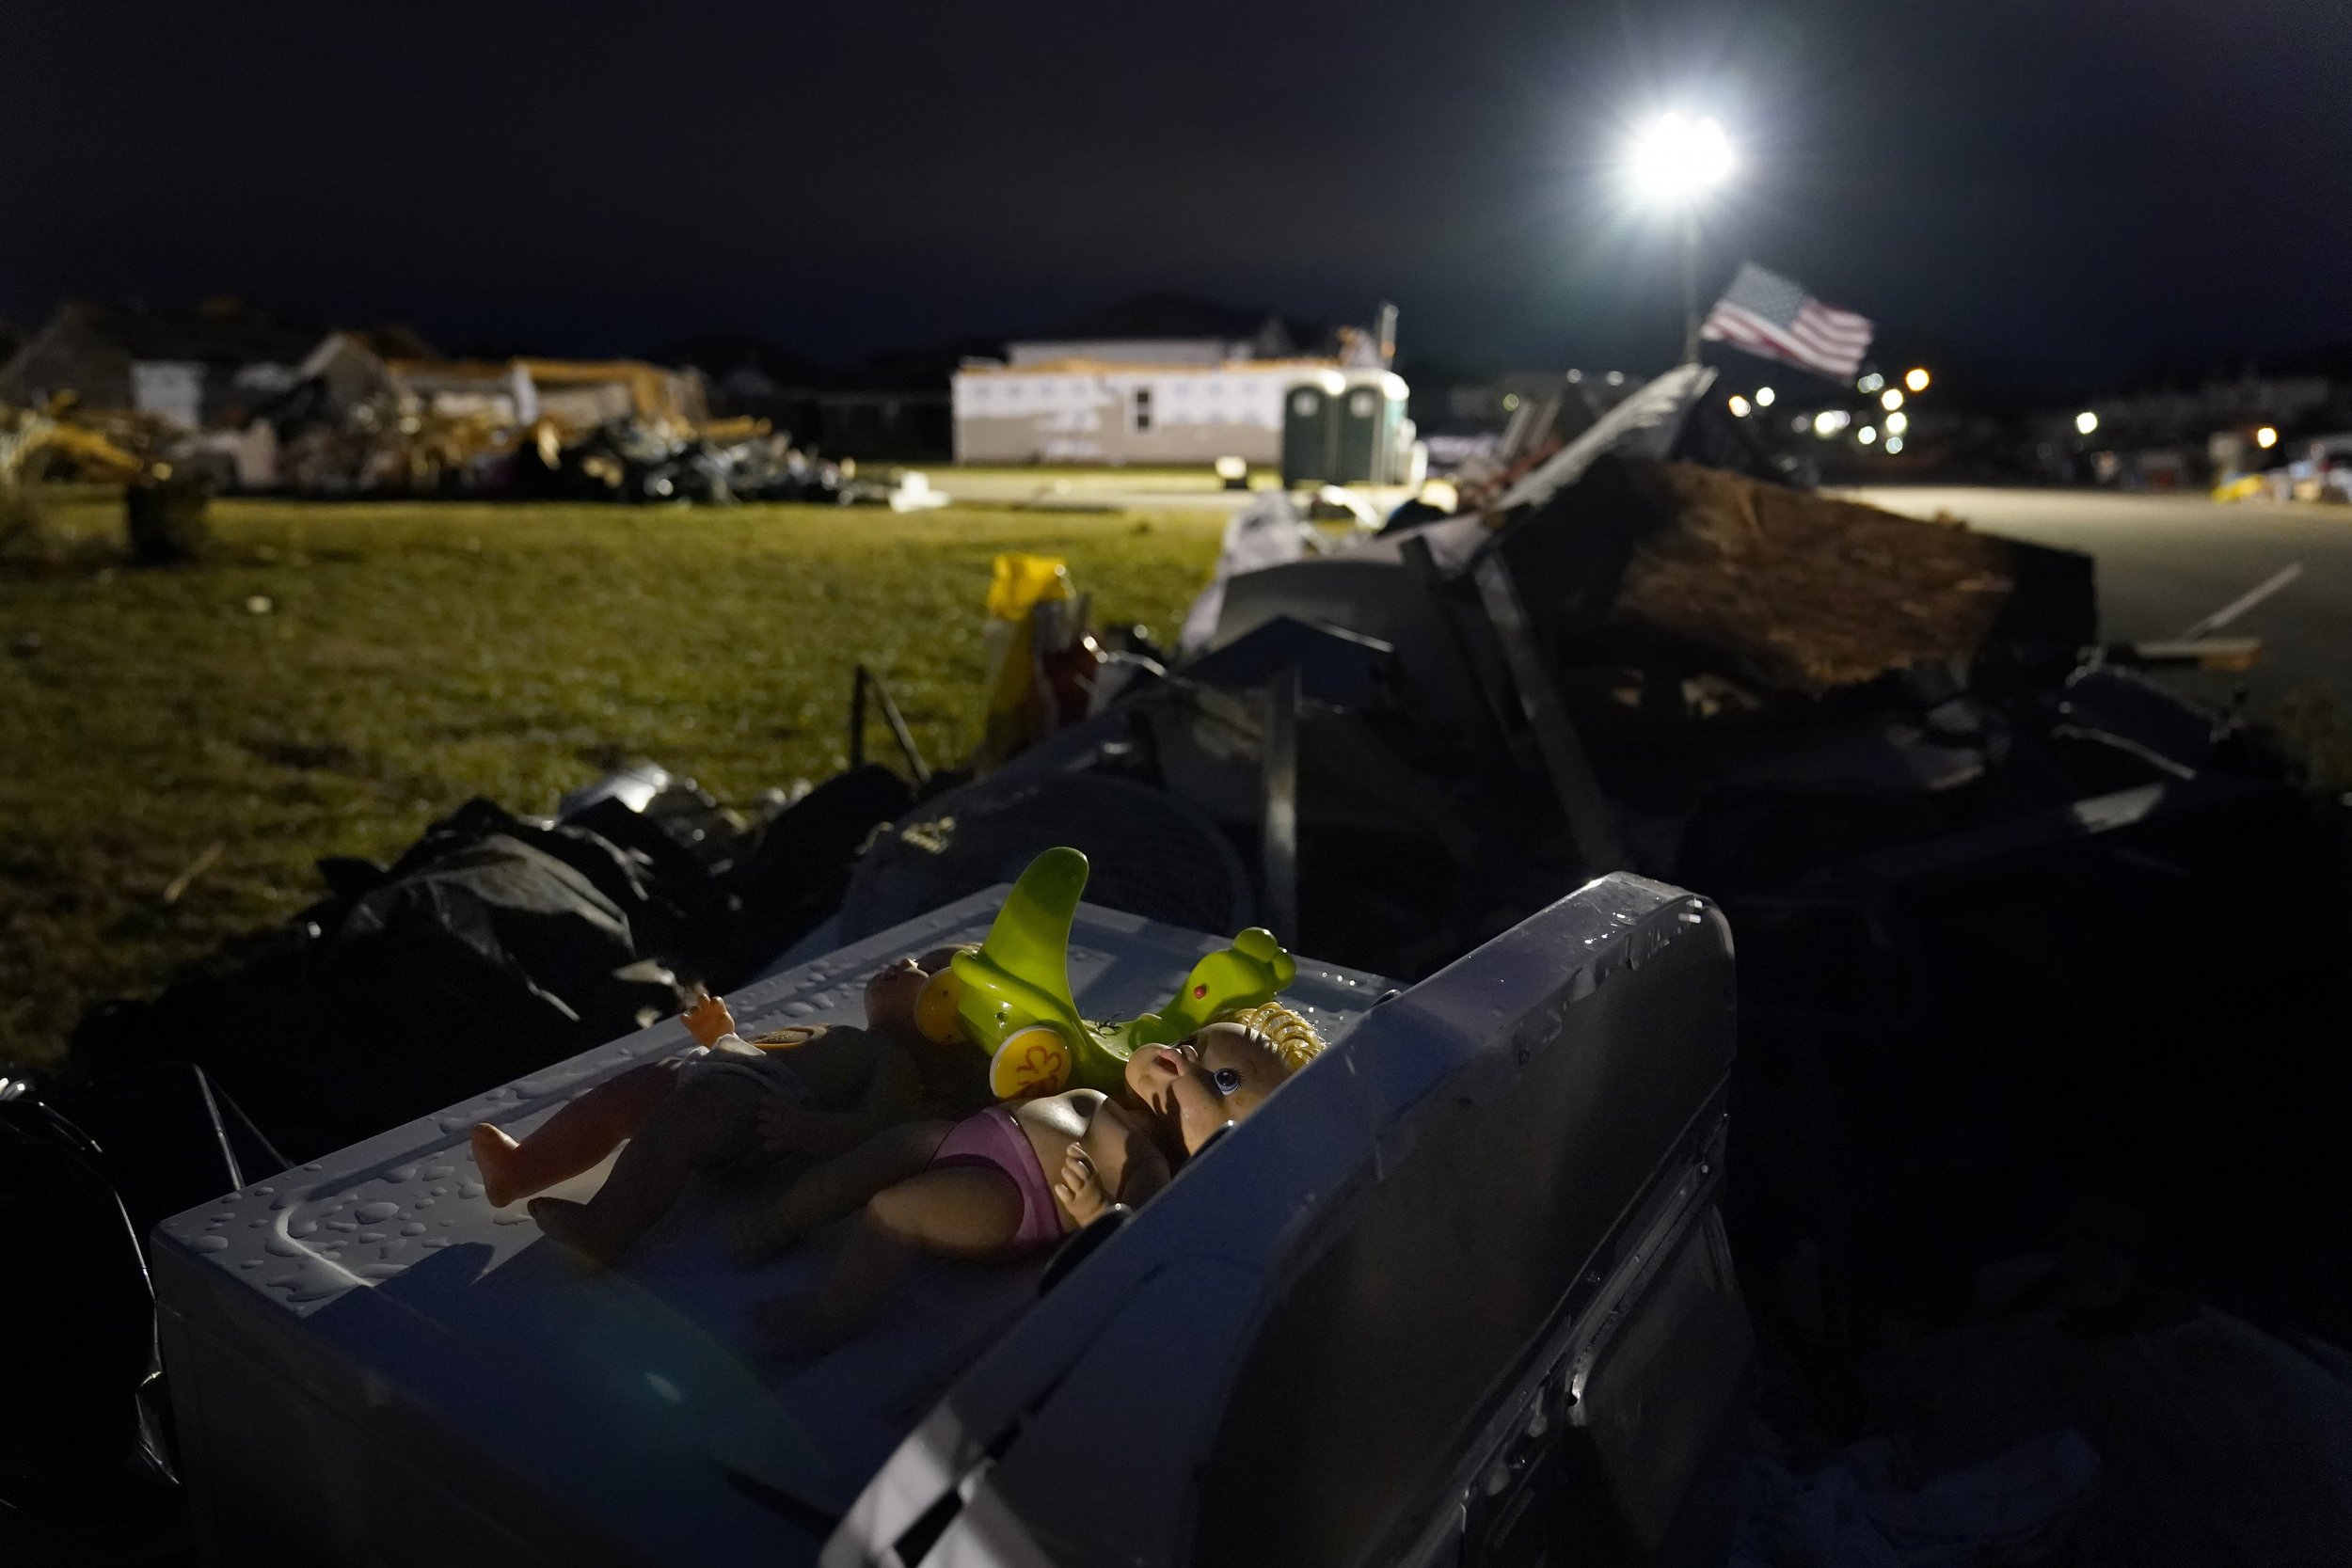  Toys set by someone on top of a washing machine lie outside surrounded by debris after an early rain on Sunday, Dec. 19, 2021, in Bowling Green, Ky. (AP Photo/Brynn Anderson) 